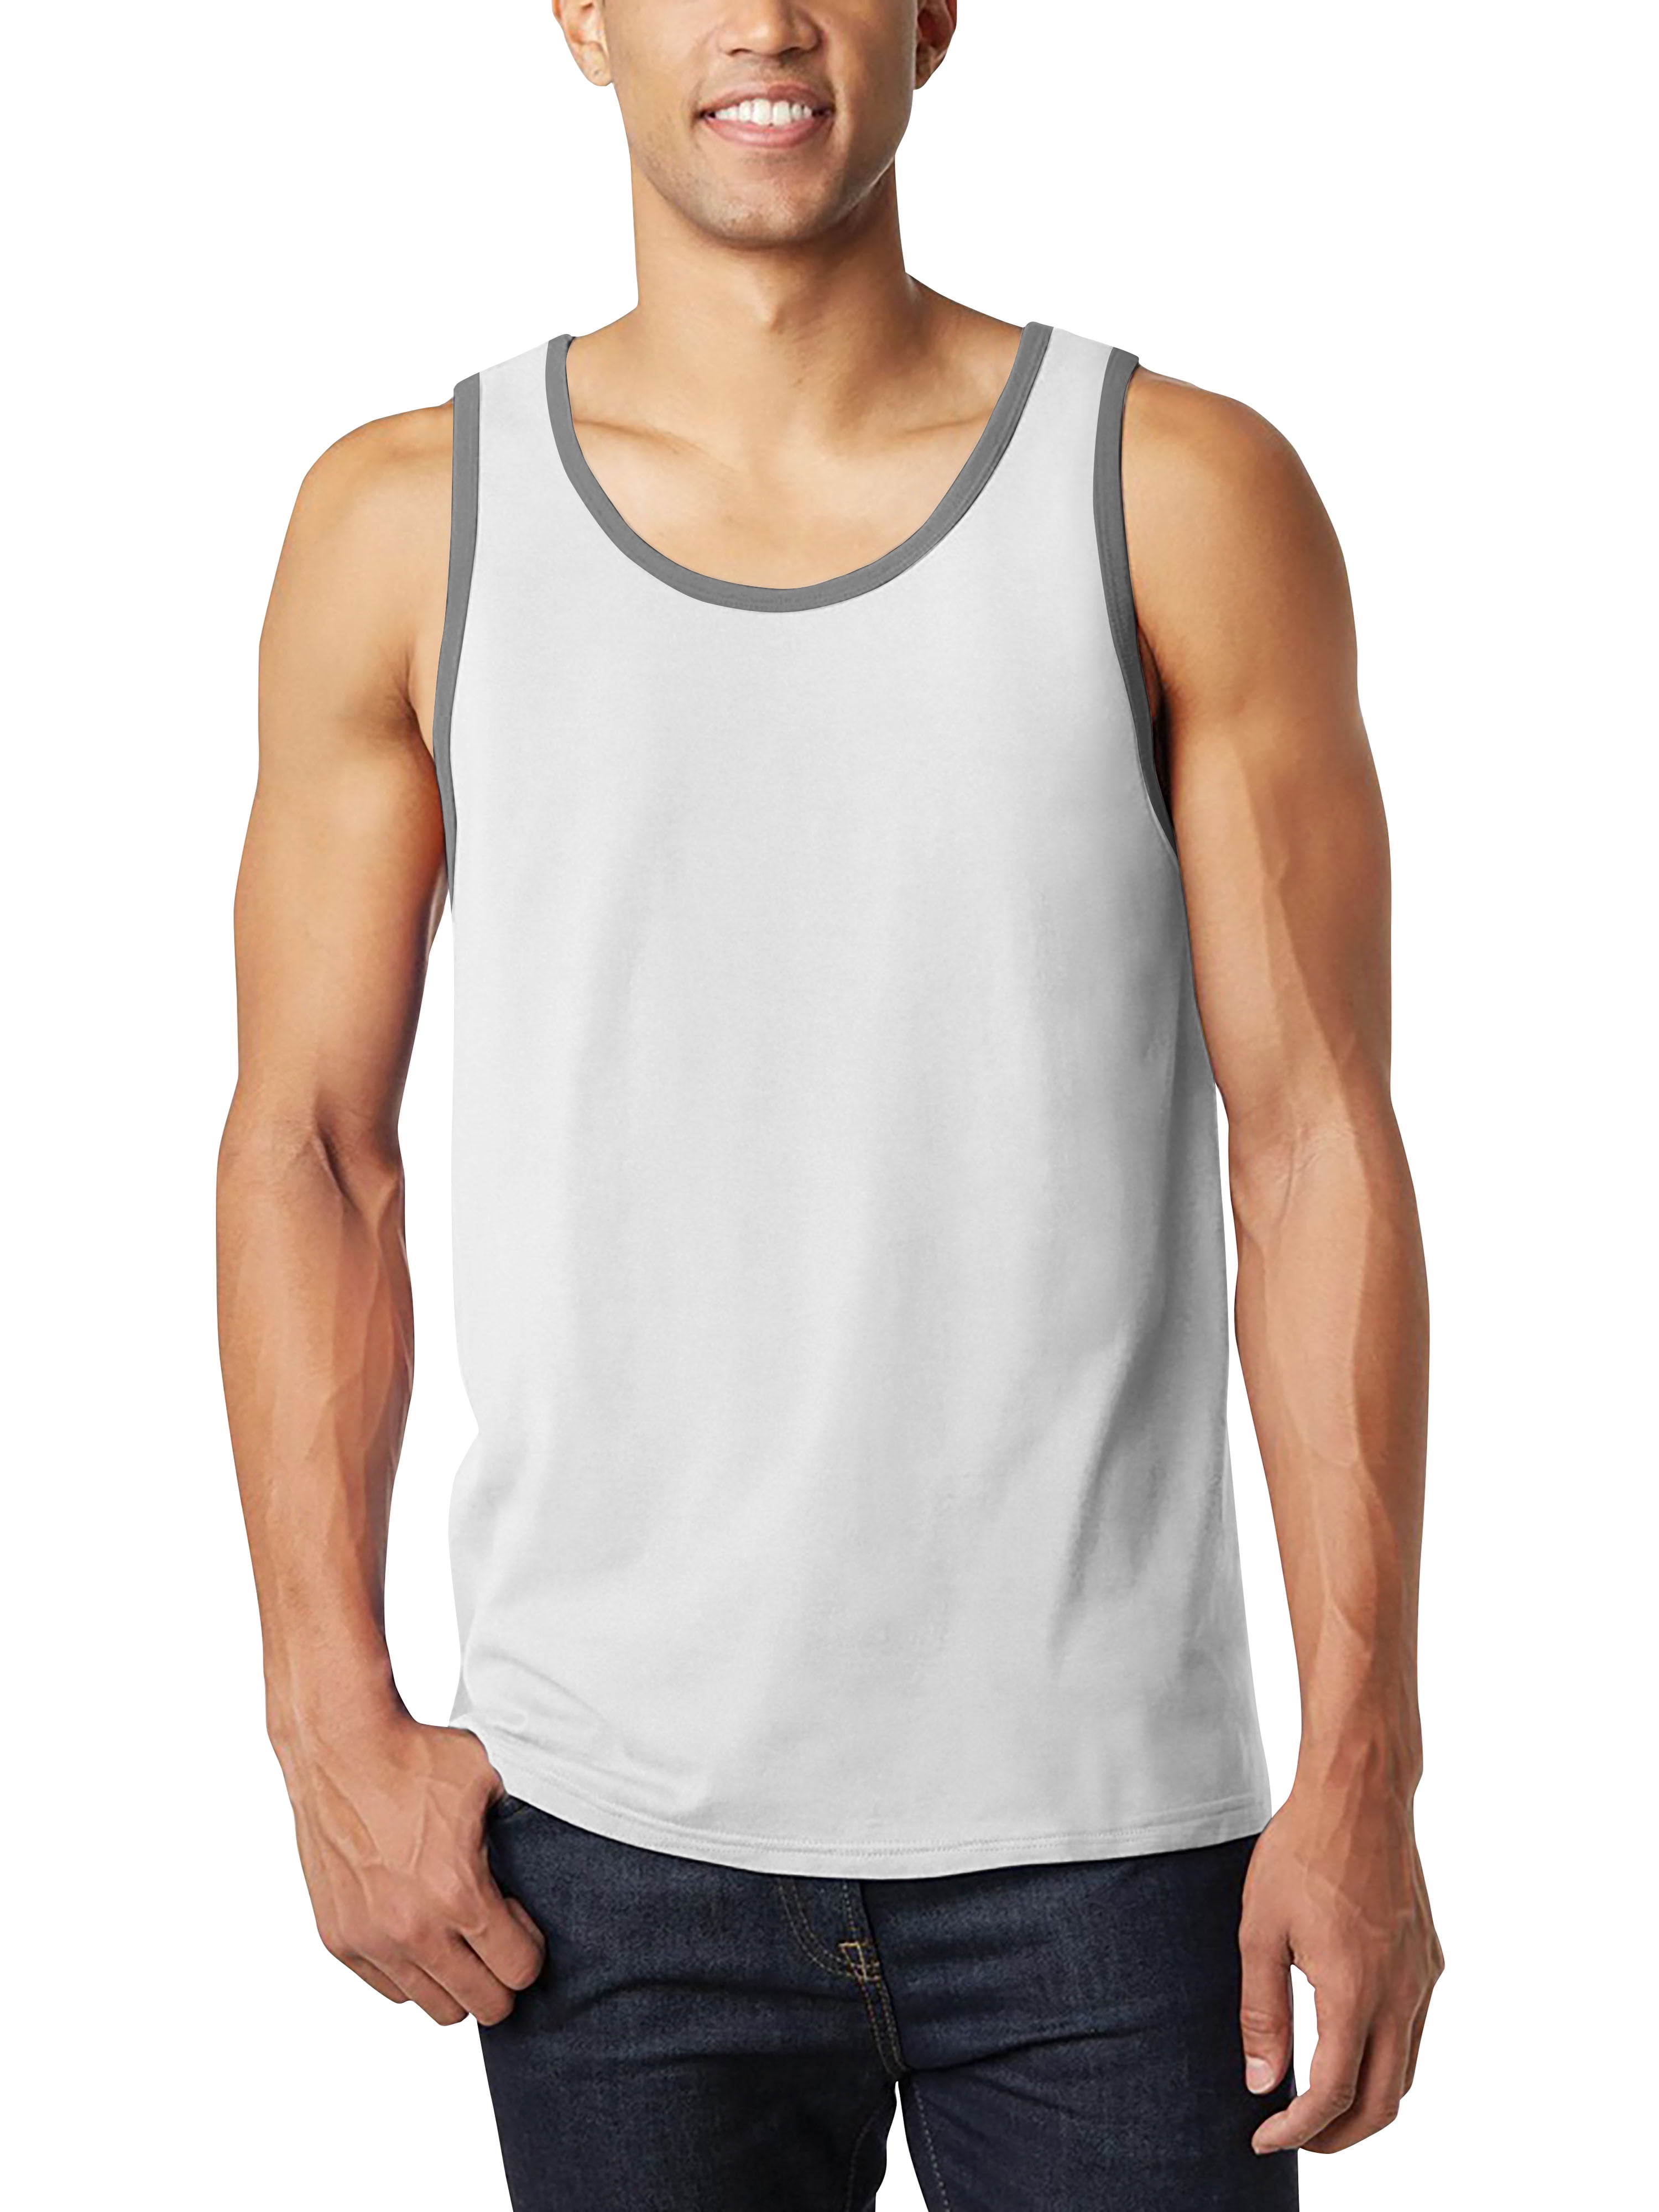 Hat and Beyond Mens Tank Top Basic Athletic Workout Beach Undershirts 